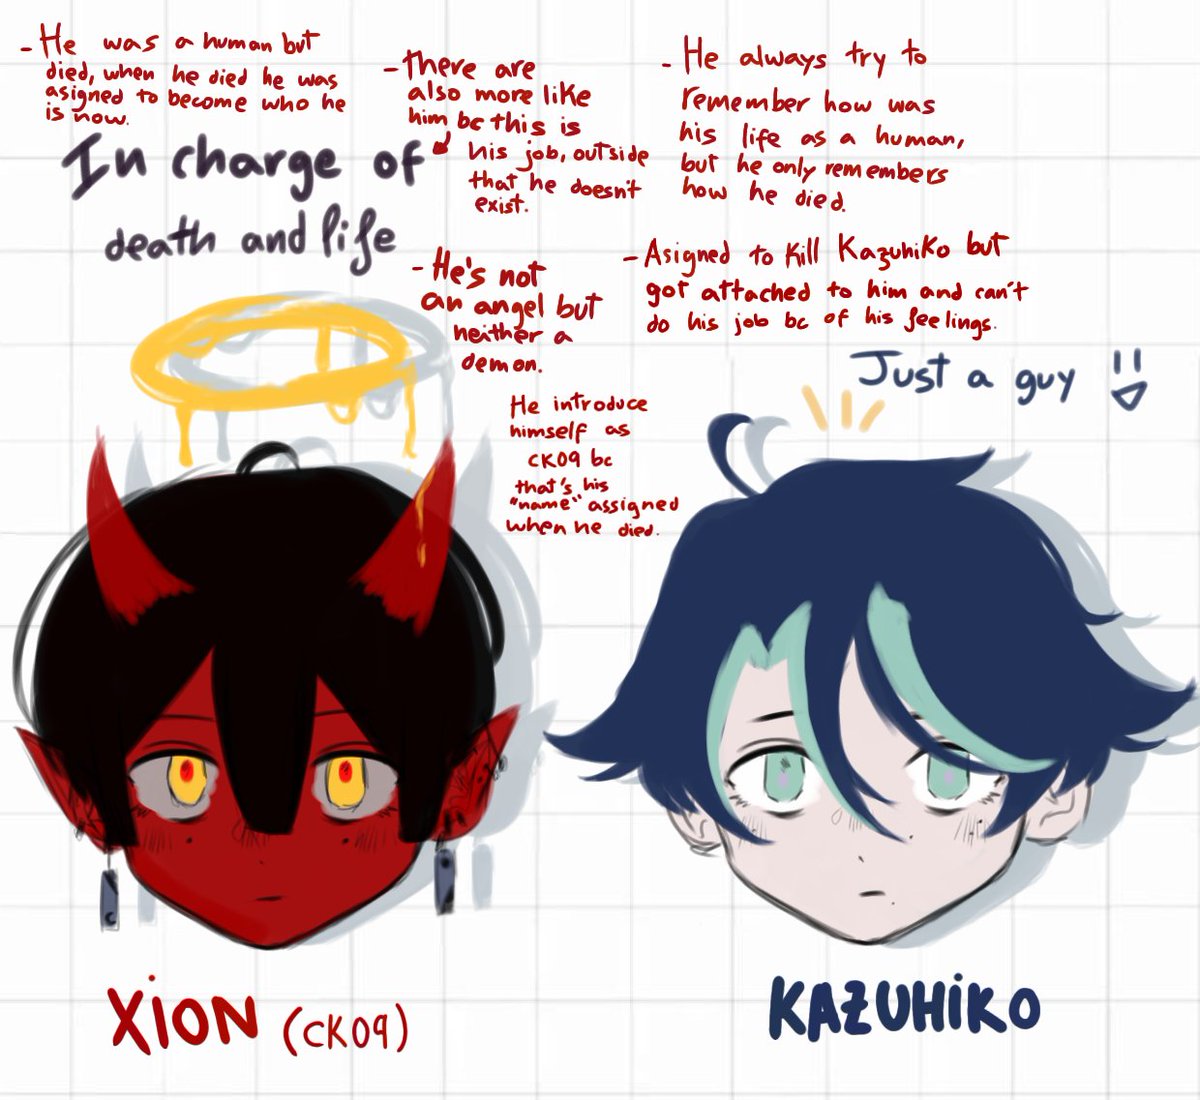 New ocs woooo this is just so I remember who do they look and I don't forget. 